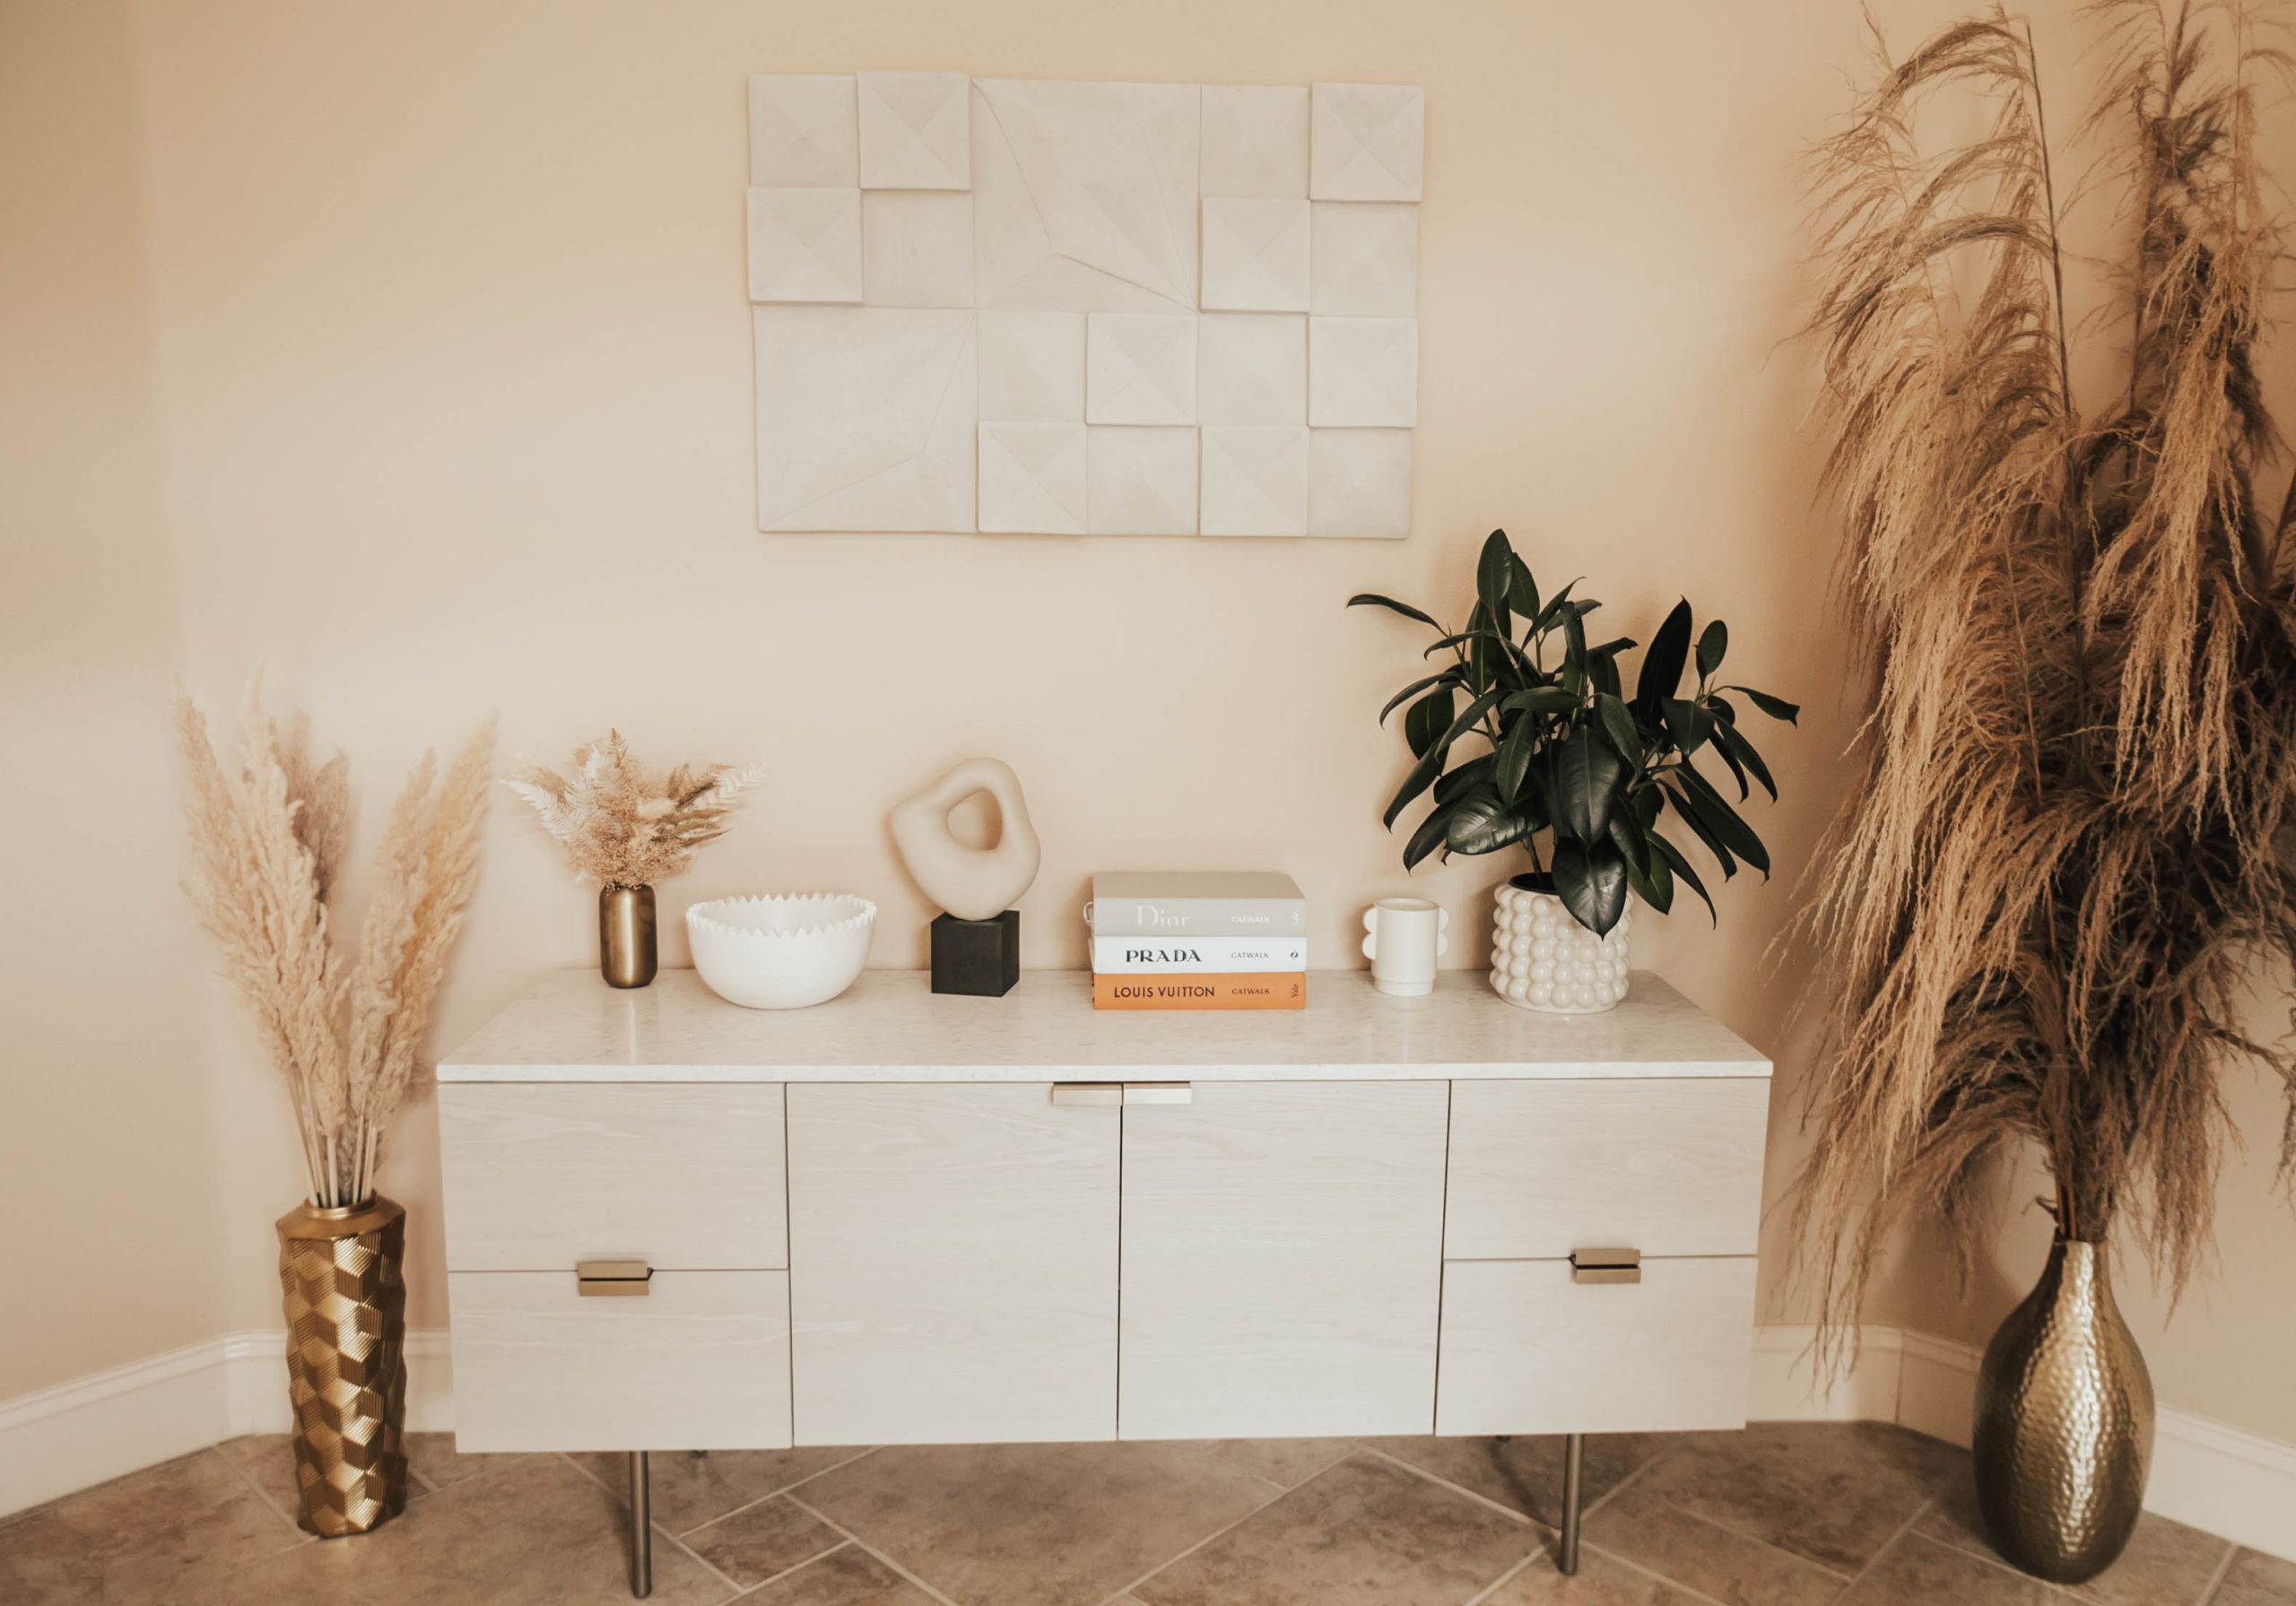 Reno blogger, Ashley Zeal Hurd, from the Ashley and Emily blog shares all of the items she purchased for her spring home refresh. 